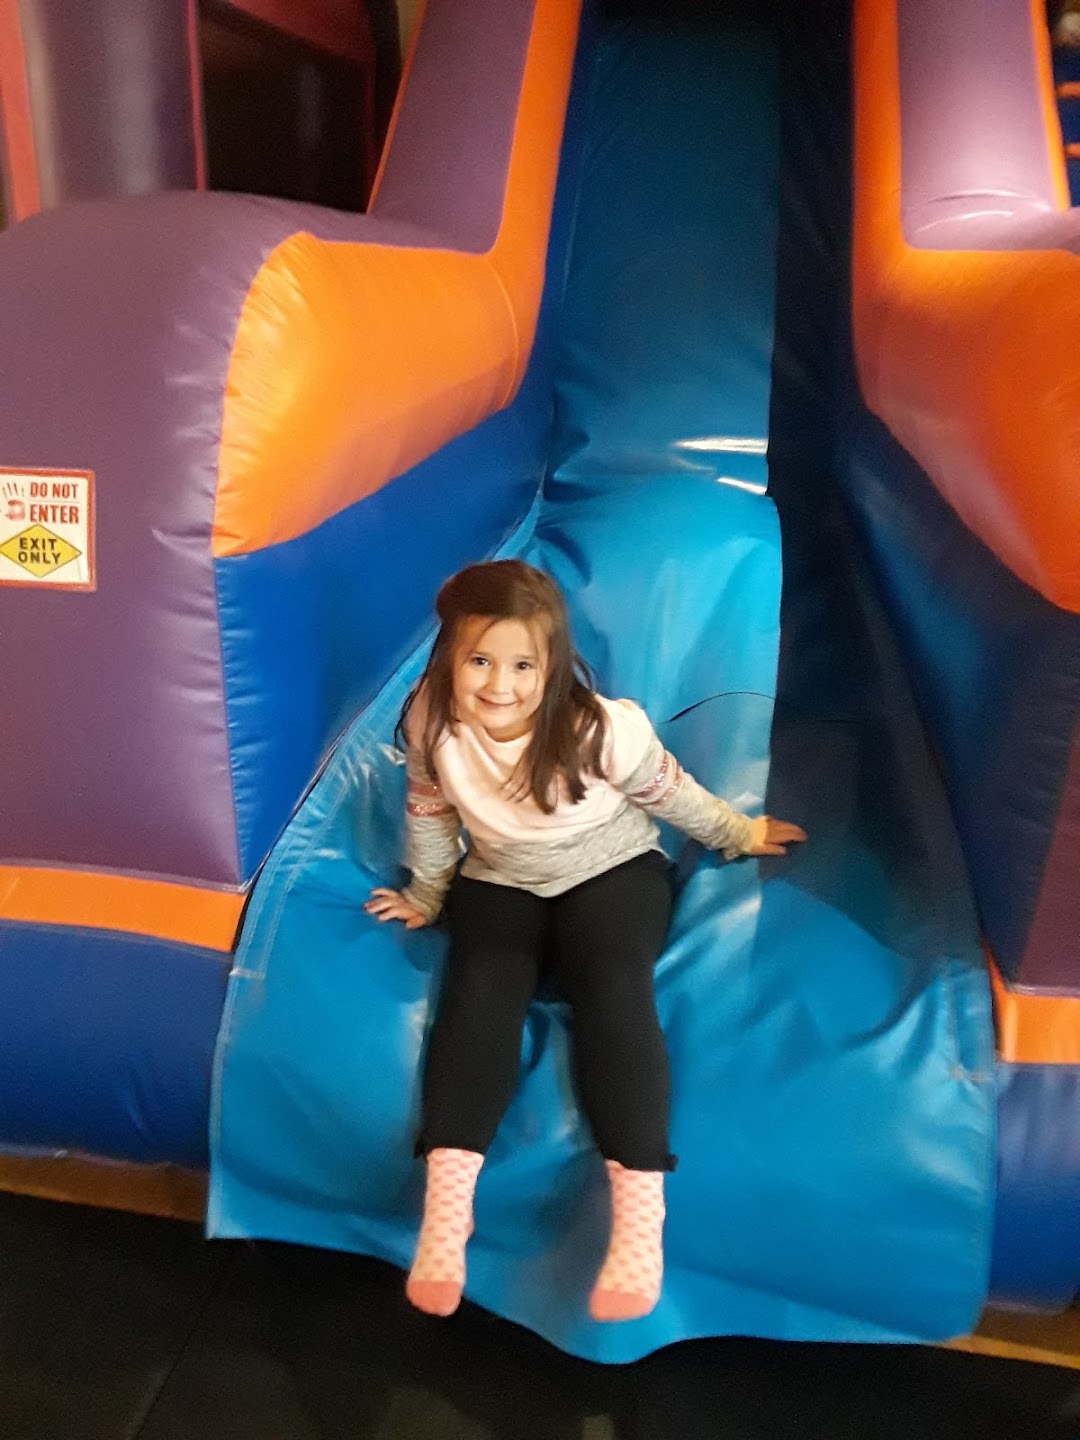 Bounce Indoor Inflatable Park